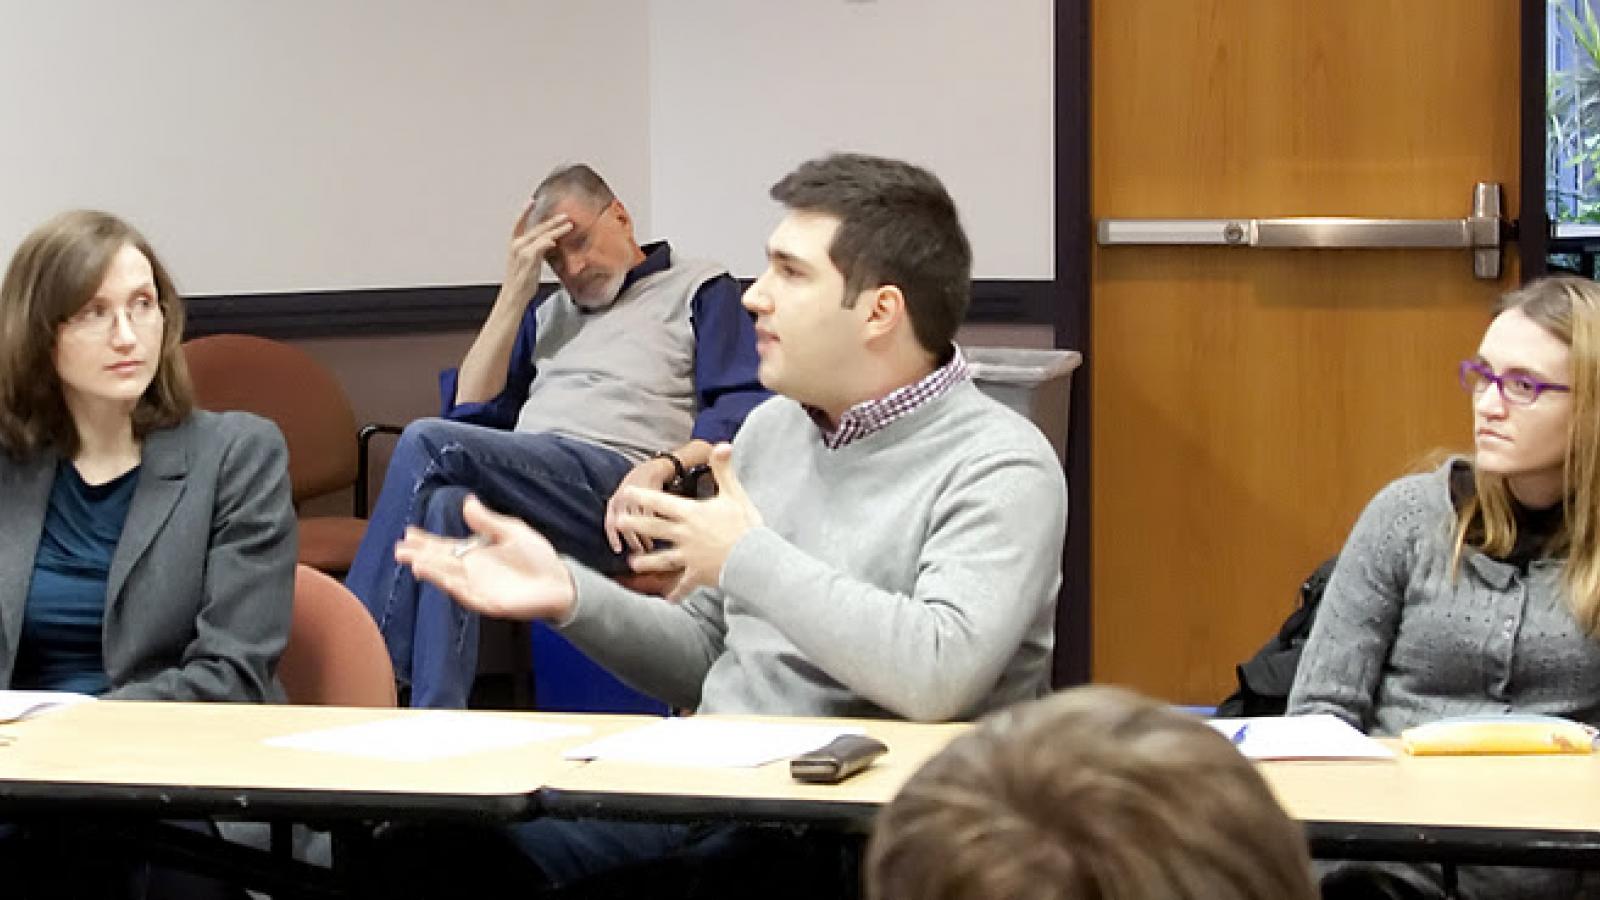 Graduate Students Raphael Cunha and Marzia Oceno participate in a roundtable discussion at the Mershon Center for International Security Studies